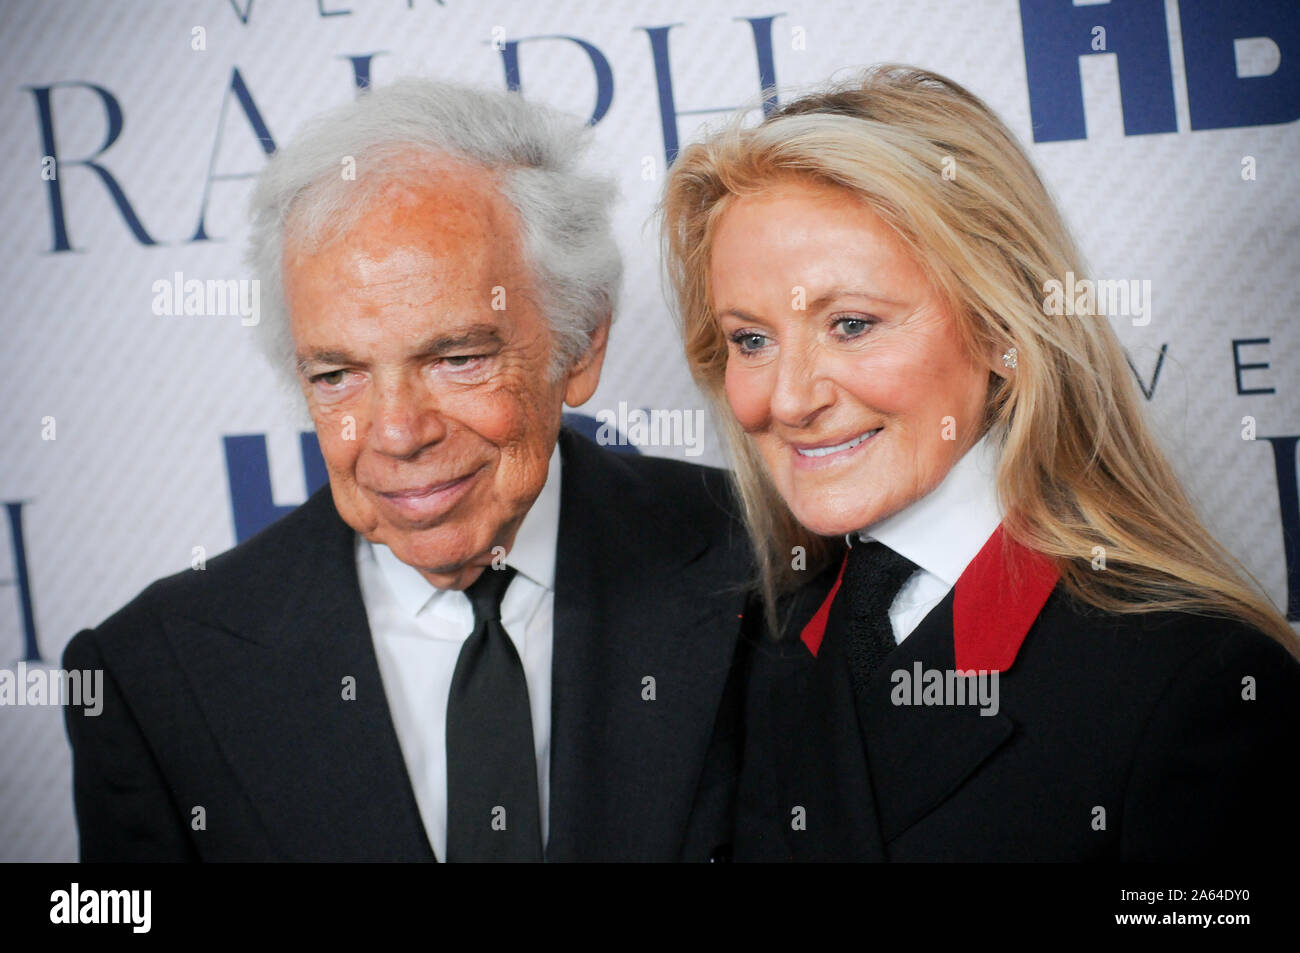 Ralph & Ricky Lauren – Perpetualist Couple – The Perpetualist